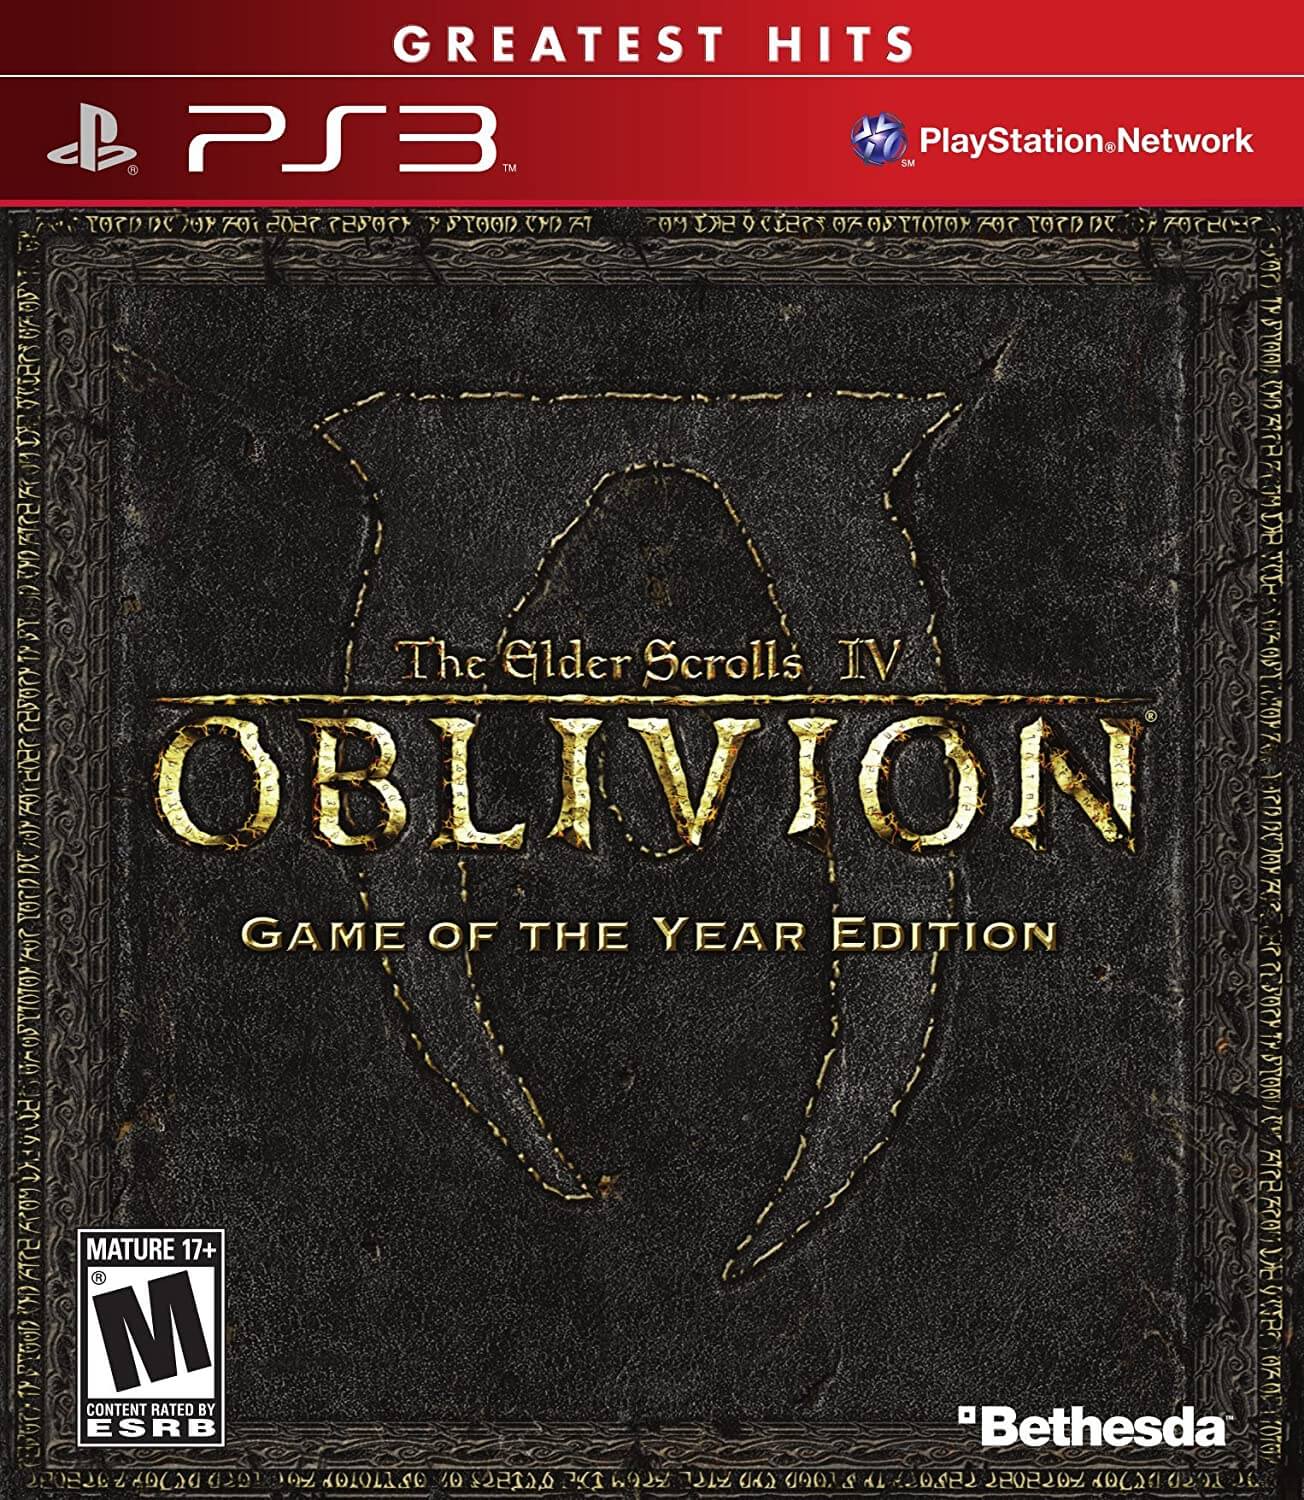 The Elder Scrolls IV: Oblivion: Game of the Year Edition